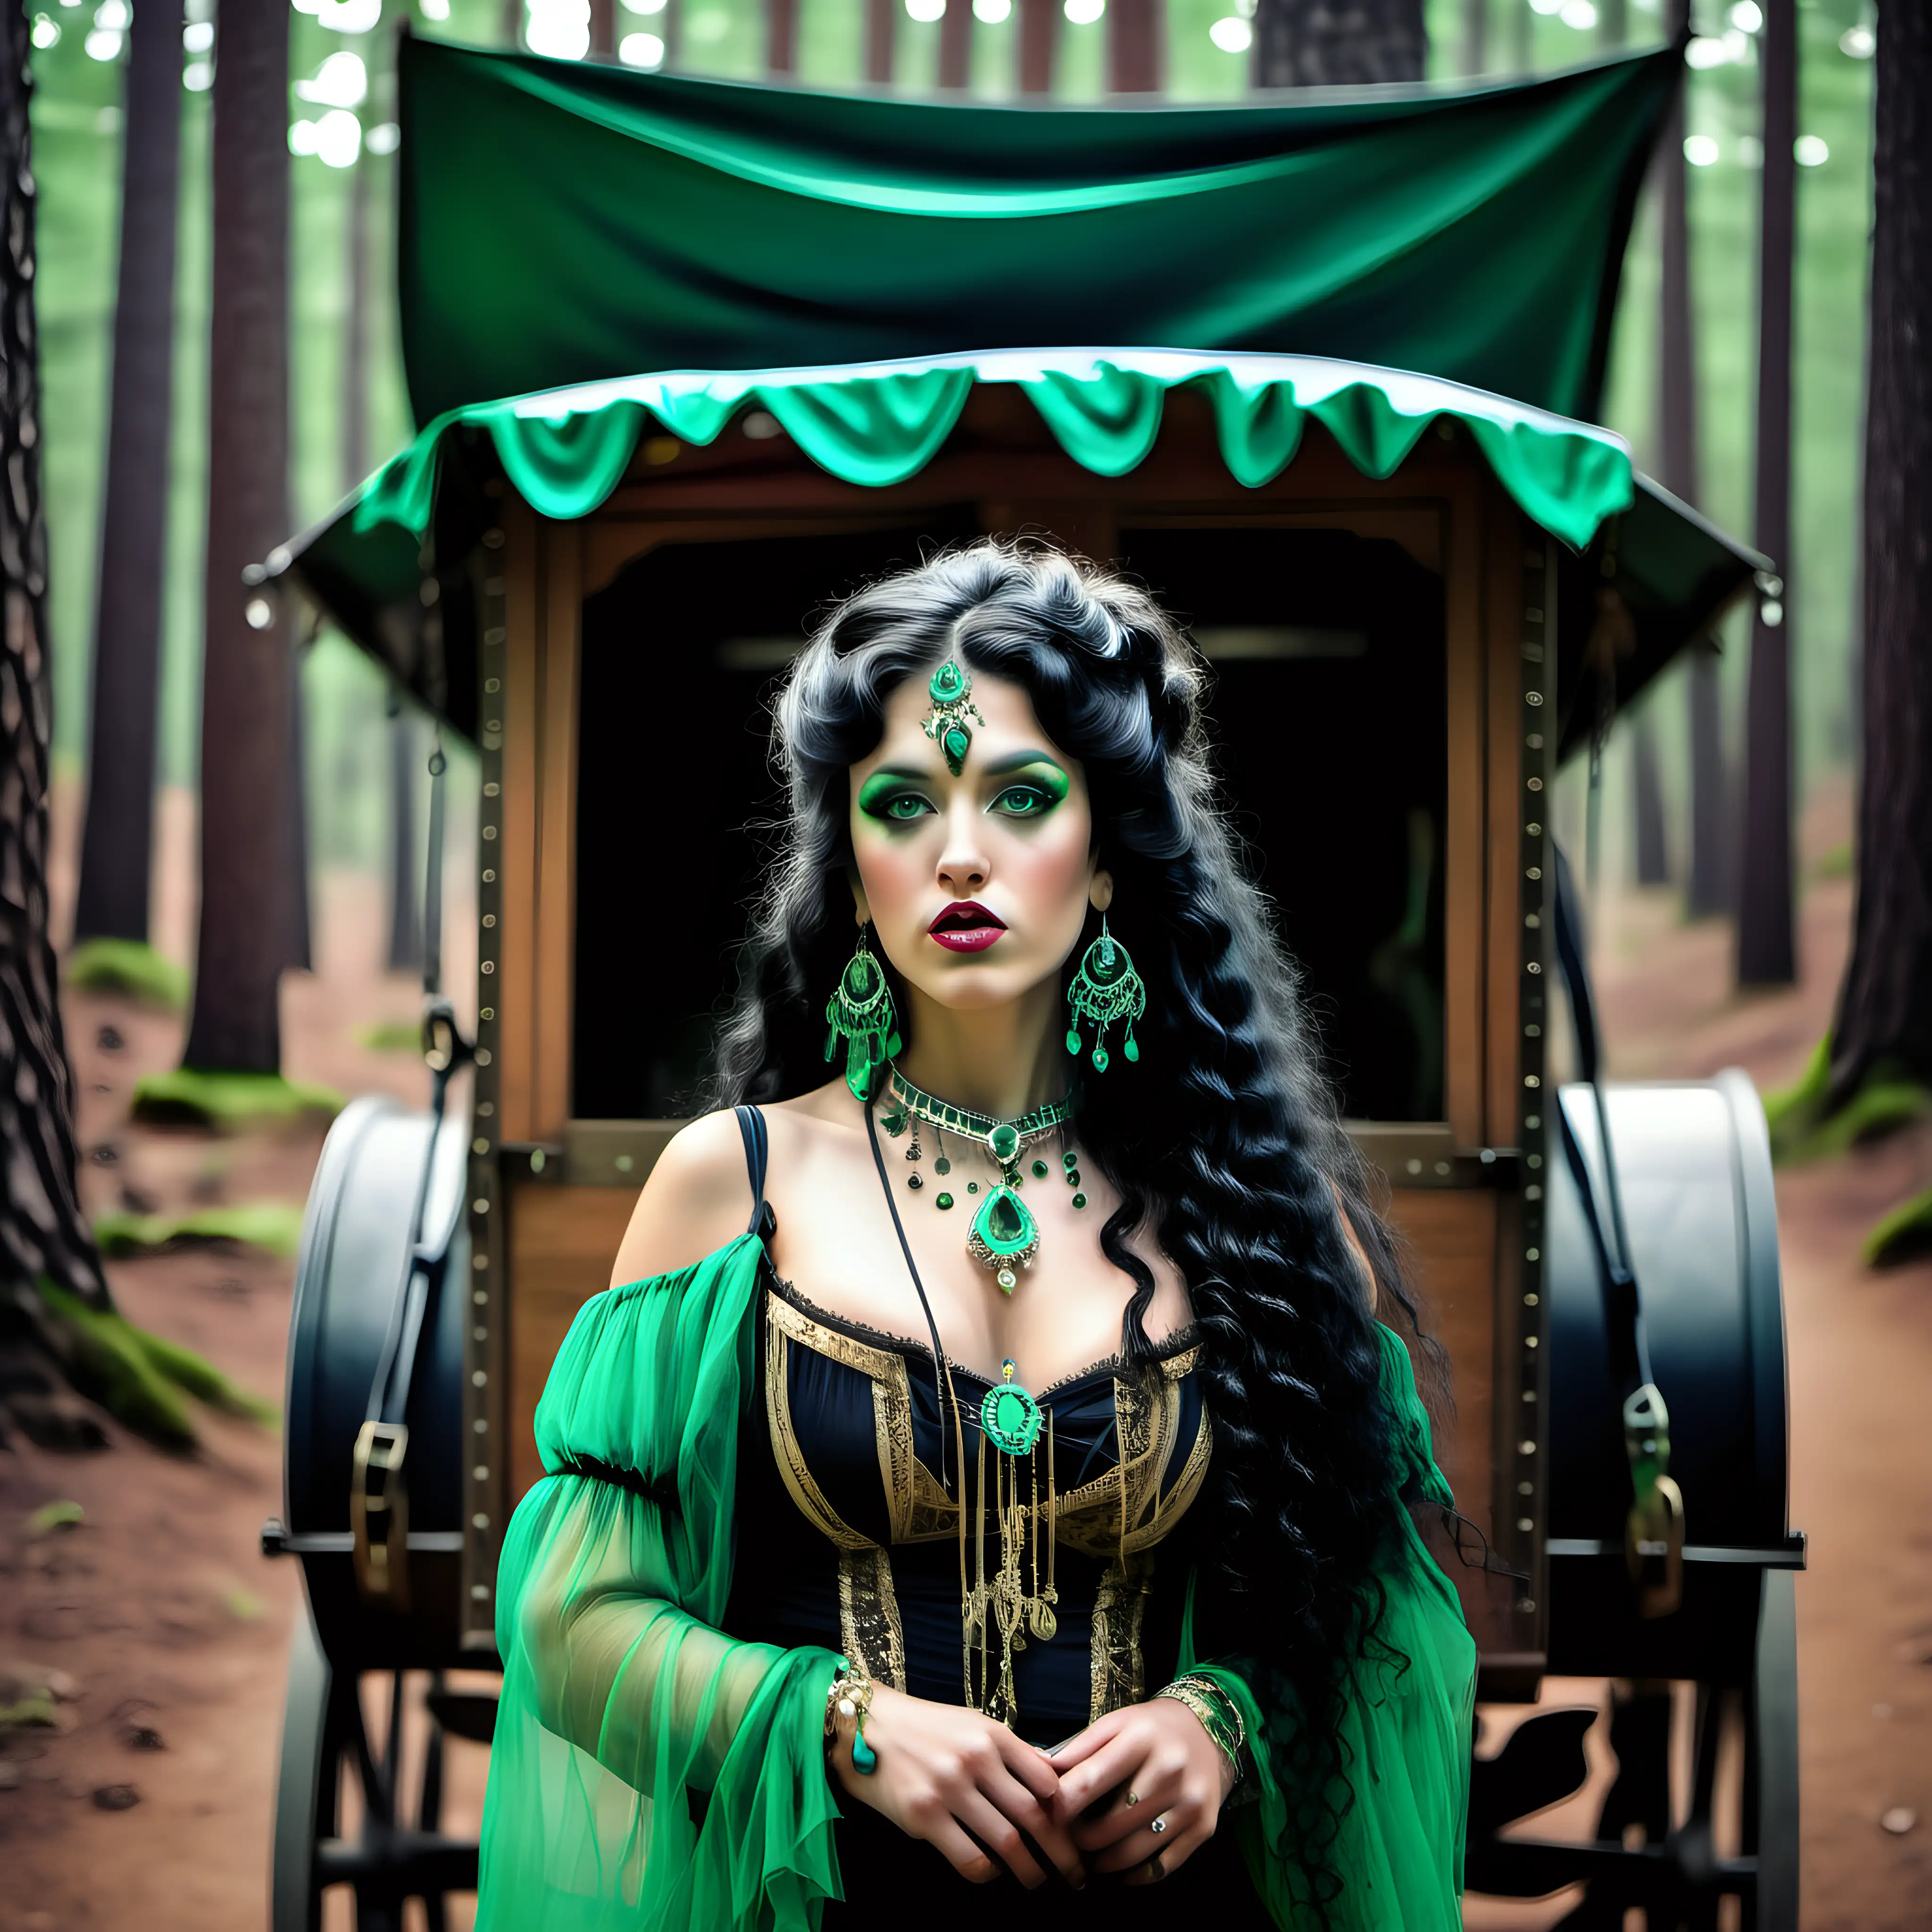 Enchanting Gypsy Wagon in Pine Forest with Elegant Gypsy Woman and Horses